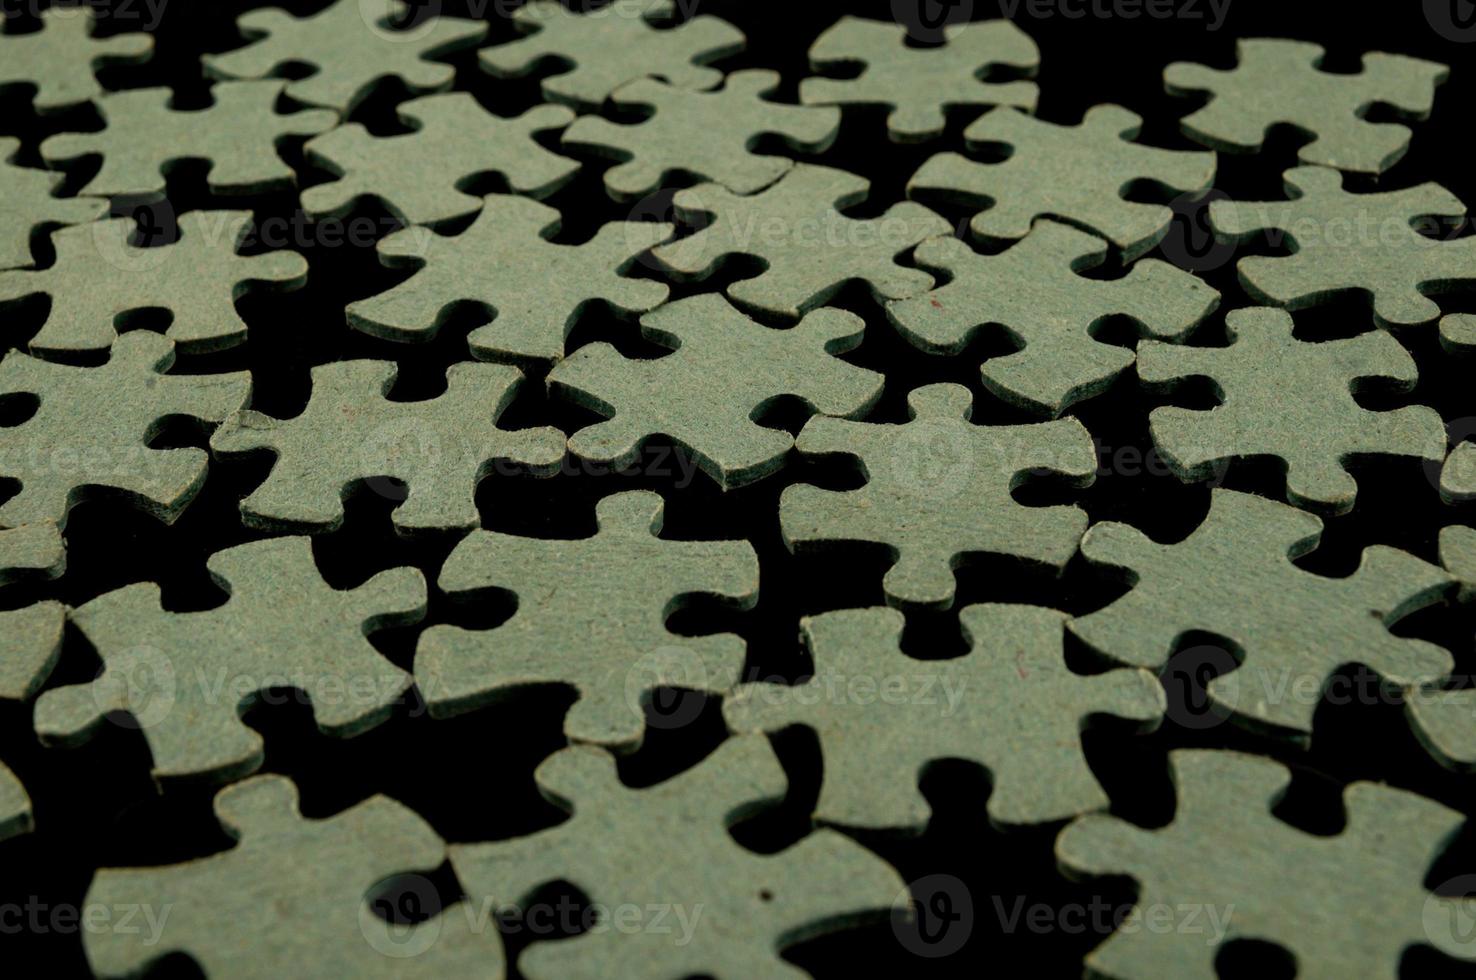 Green puzzle pieces photo